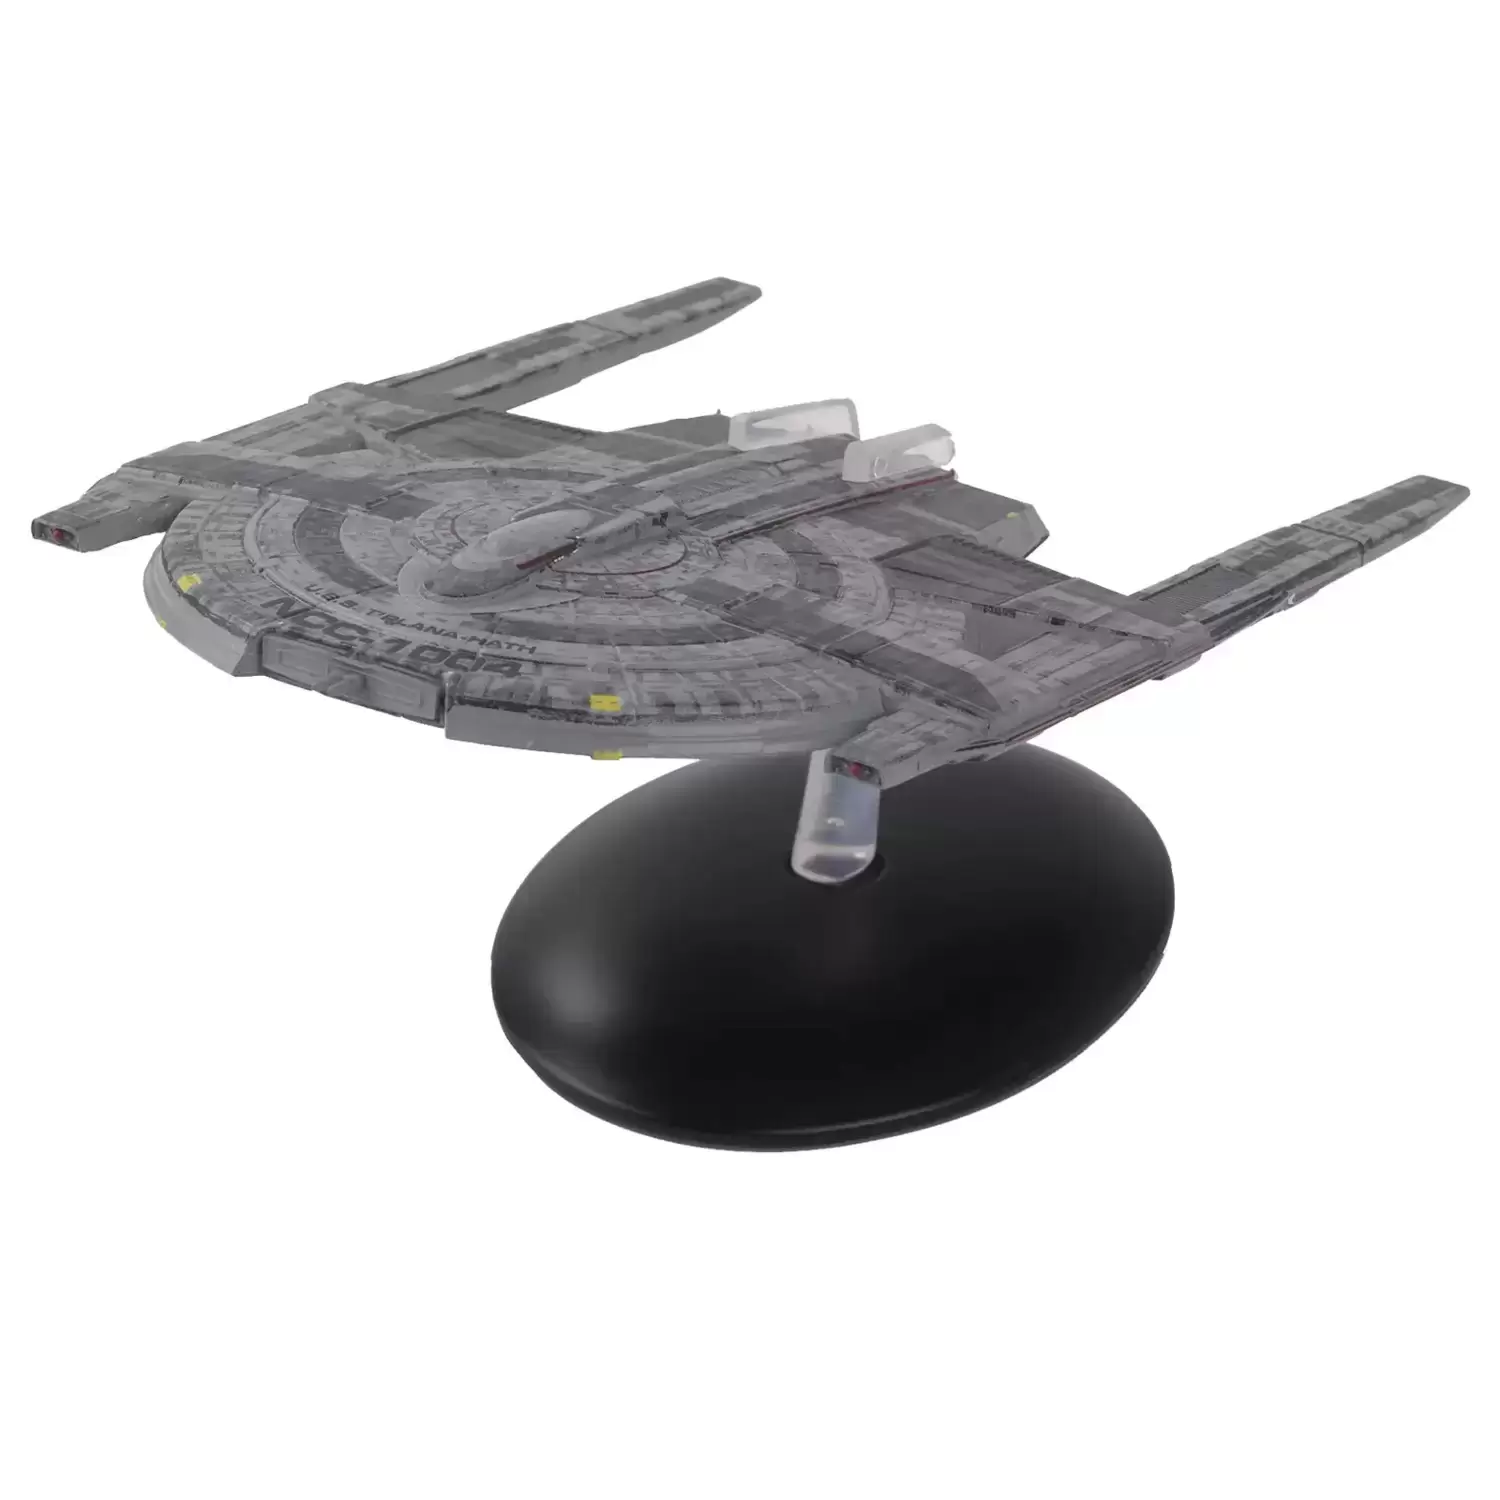 Star Trek Discovery The Official Starships Collection - U.S.S. T\'Plana-Hath NCC-1004 (Engle-class)